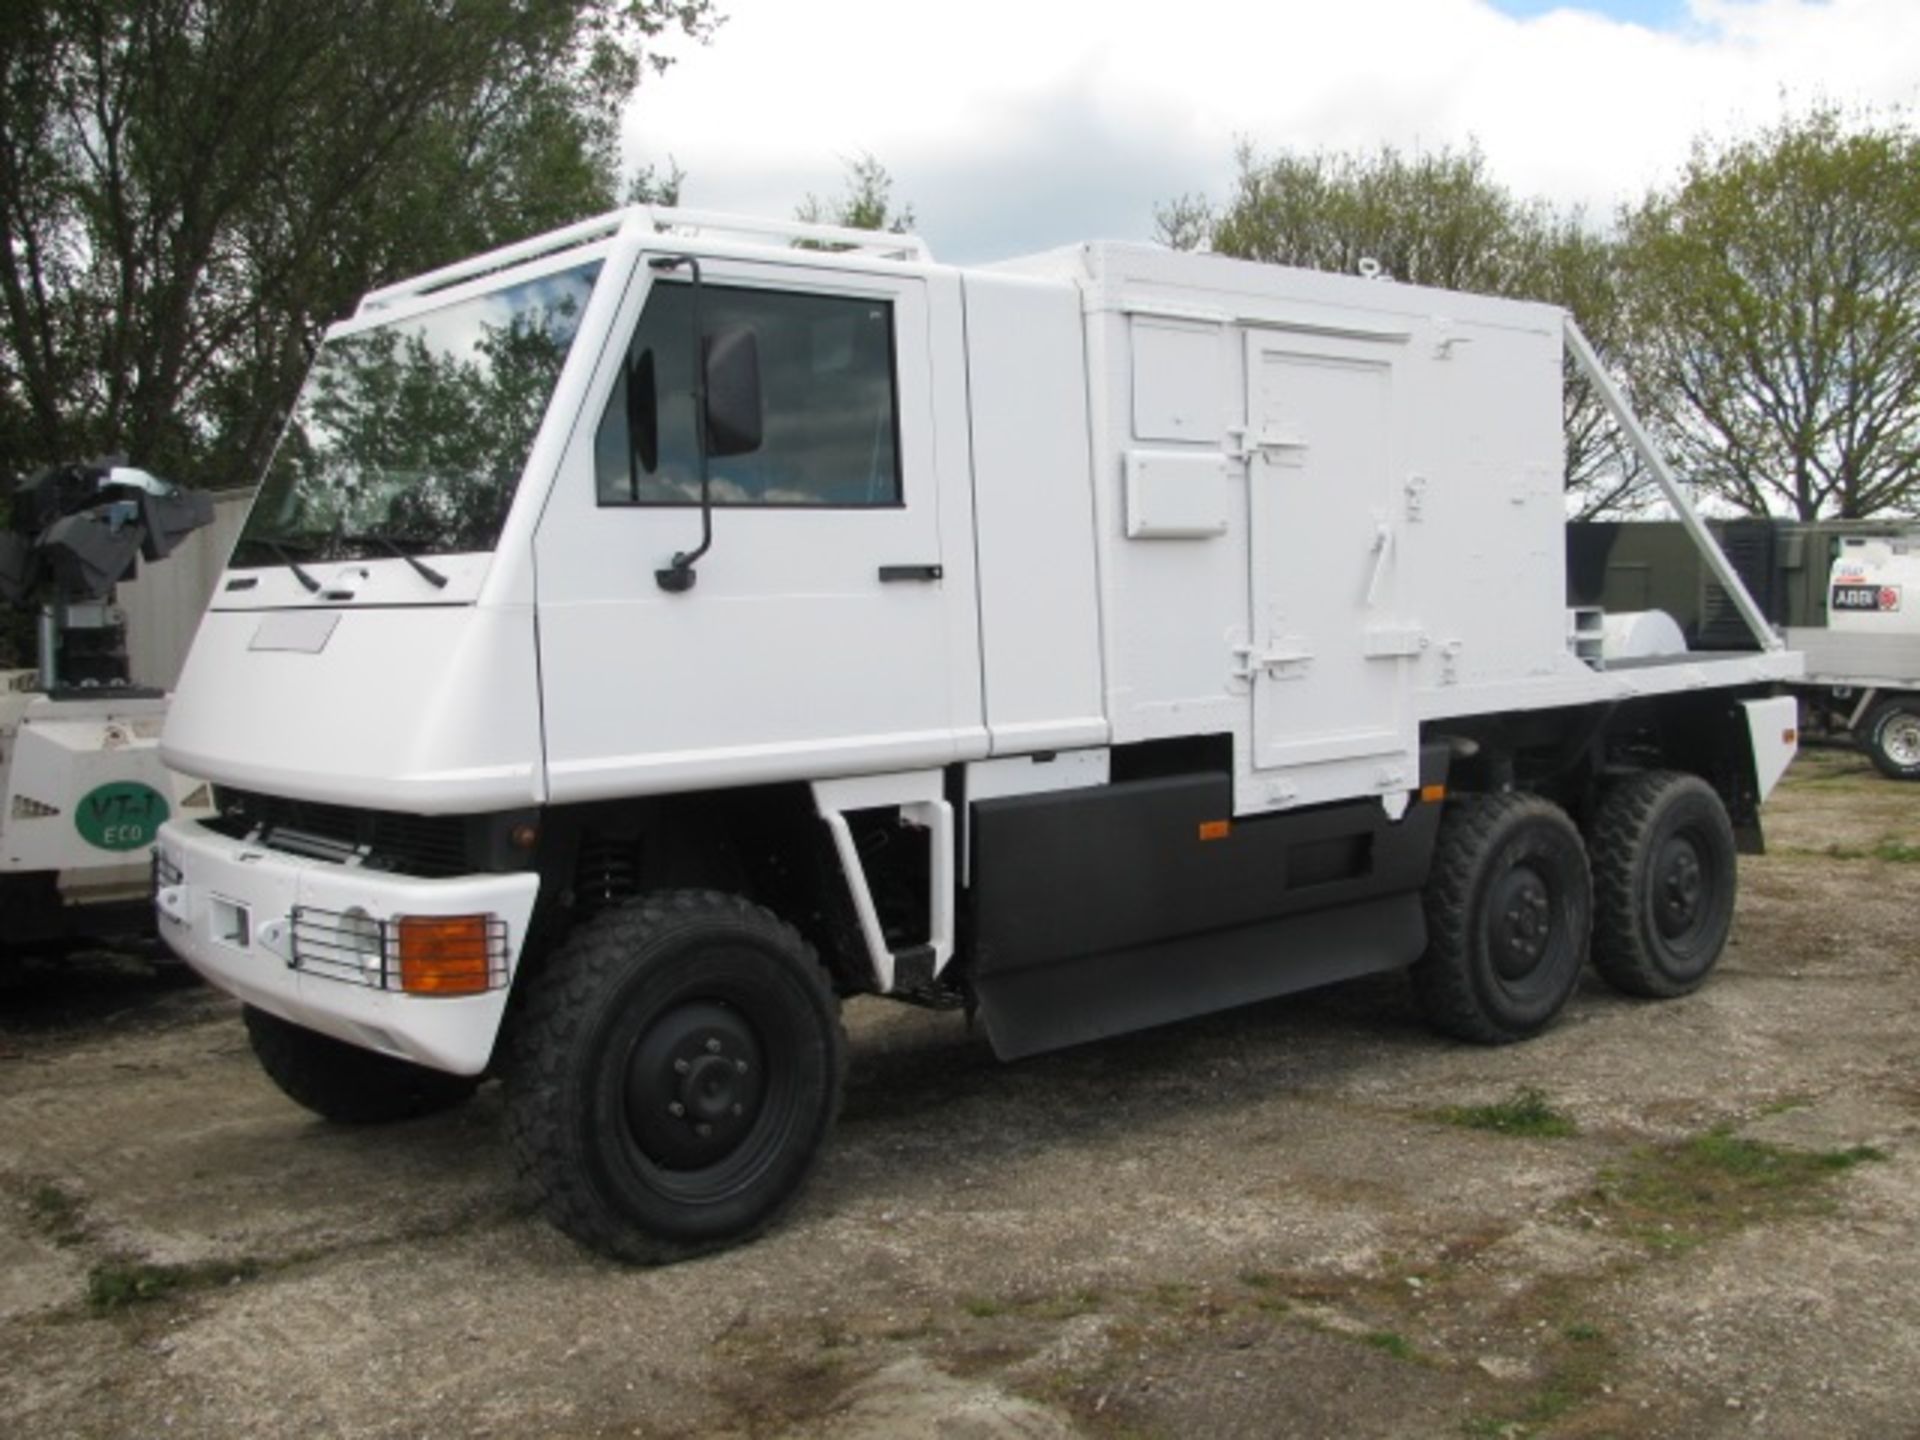 Bucher Guyer Mowag Duro II 6 x 6 Road legal Automatic High Mobility Tactical Vehicle